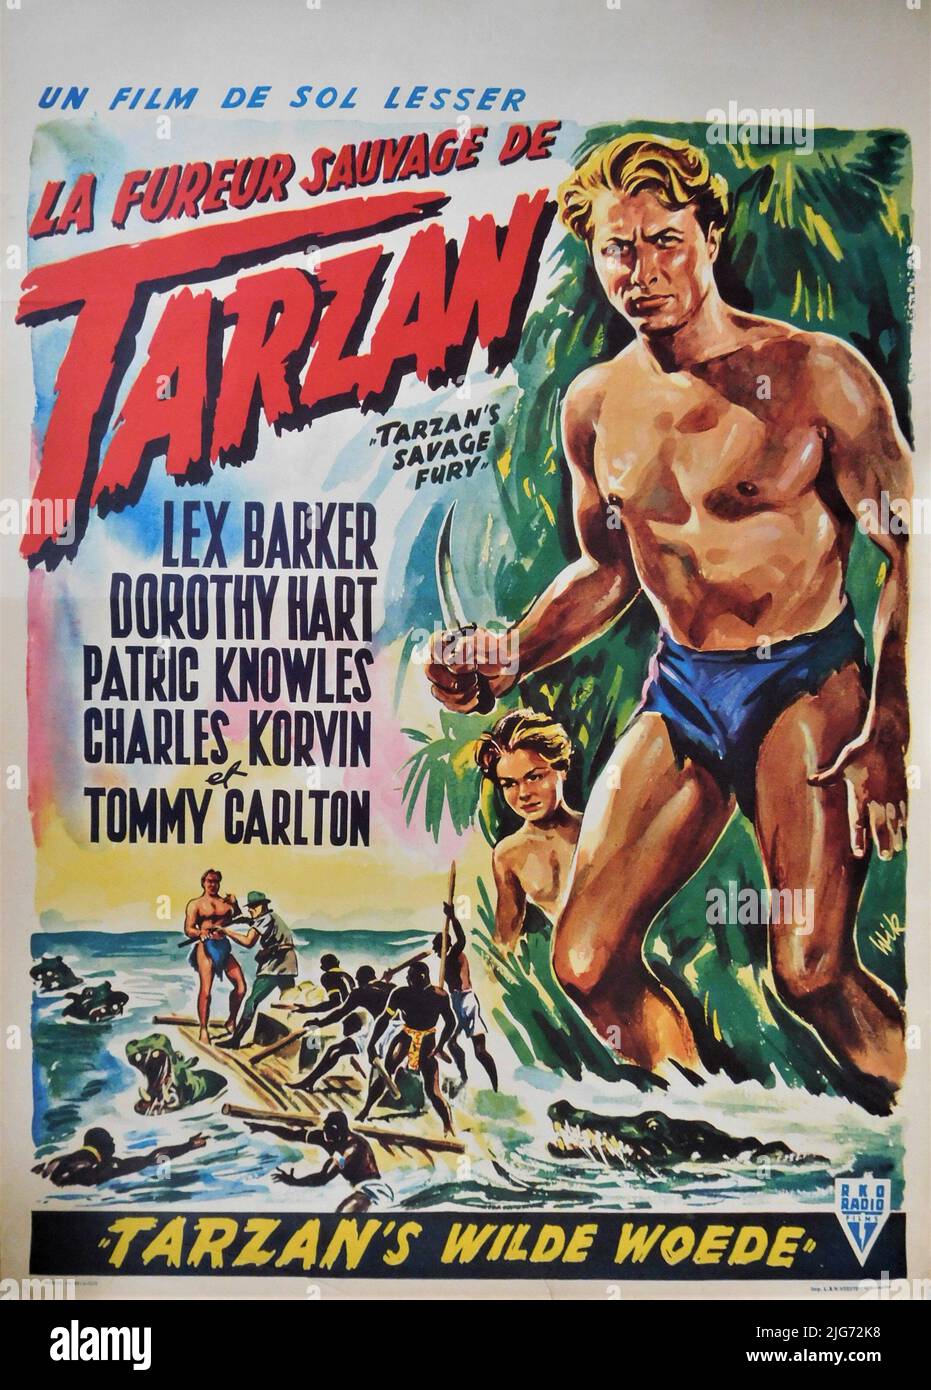 LEX BARKER and TOMMY CARLTON in TARZAN'S SAVAGE FURY 1952 director CY ENFIELD based on the character created by Edgar Rice Burroughs Sol Lesser Productions / RKO Radio Pictures Stock Photo